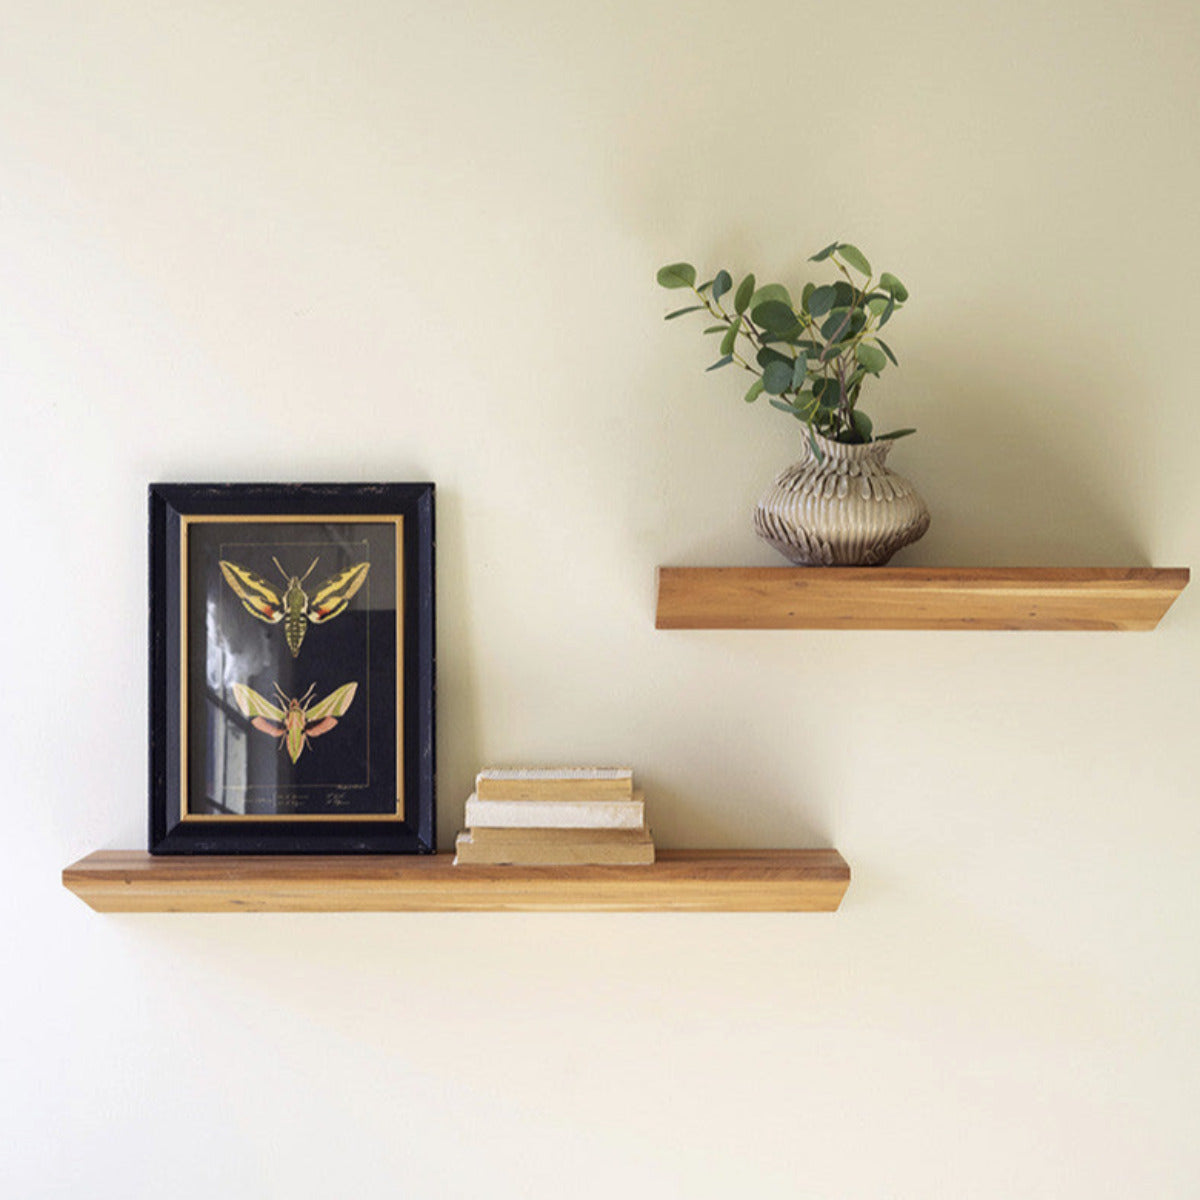 Set of 2 Floating Acacia Wood Shelves - Up, up, and away. These acacia wood shelves float on the walls. This set of two is perfect for displaying small treasures or necessities in a small space. -     Large: 36" x 8" x 3"t     Small: 24" x 8" x 3"t